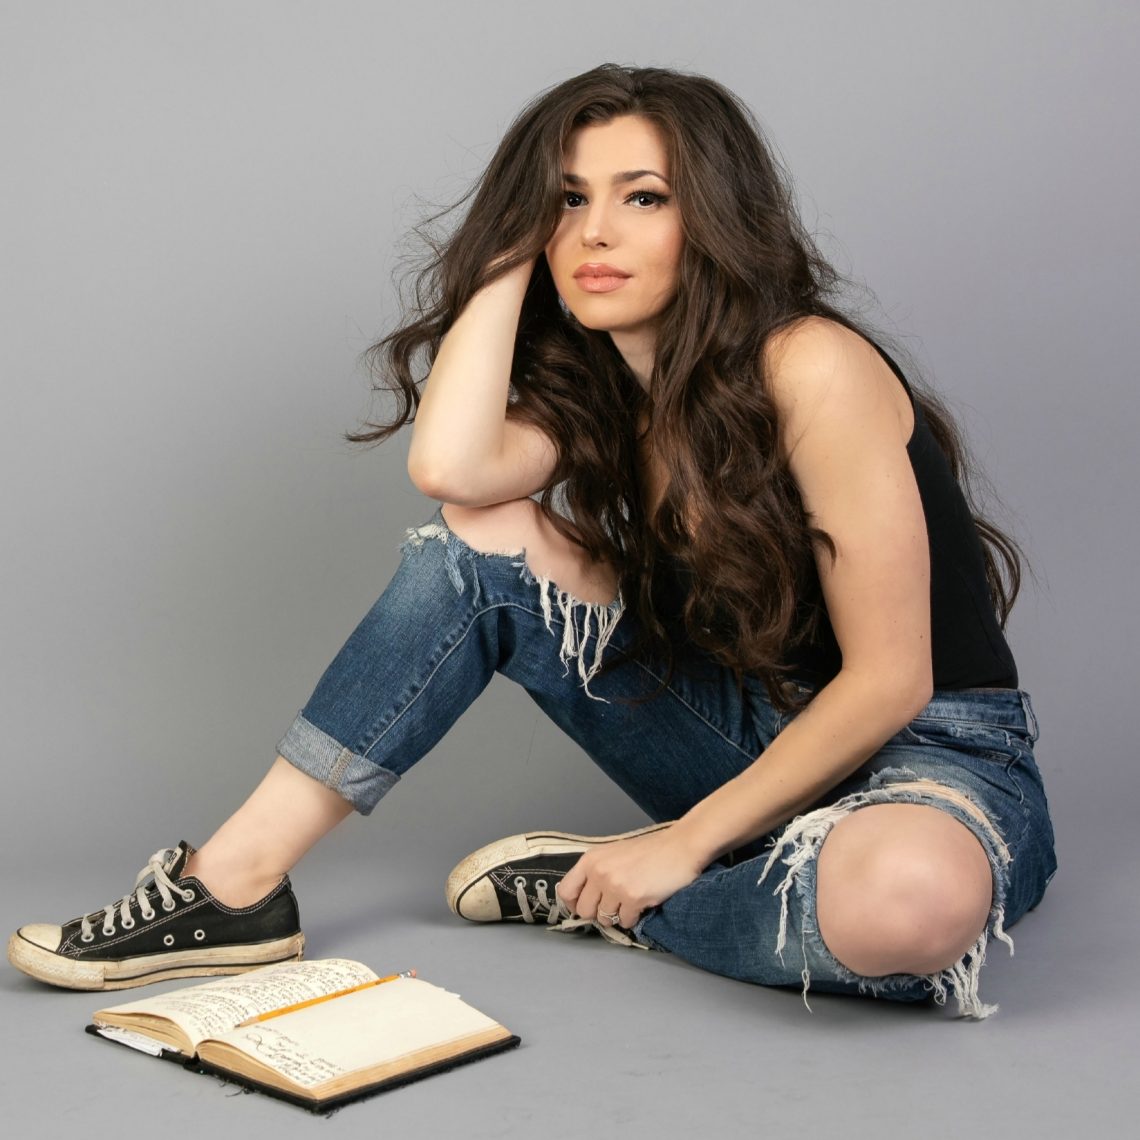 Jessica Lynn Premieres the New Video for Her Single ‘Run To’ & Announces Her Rescheduled UK Headline Tour Dates